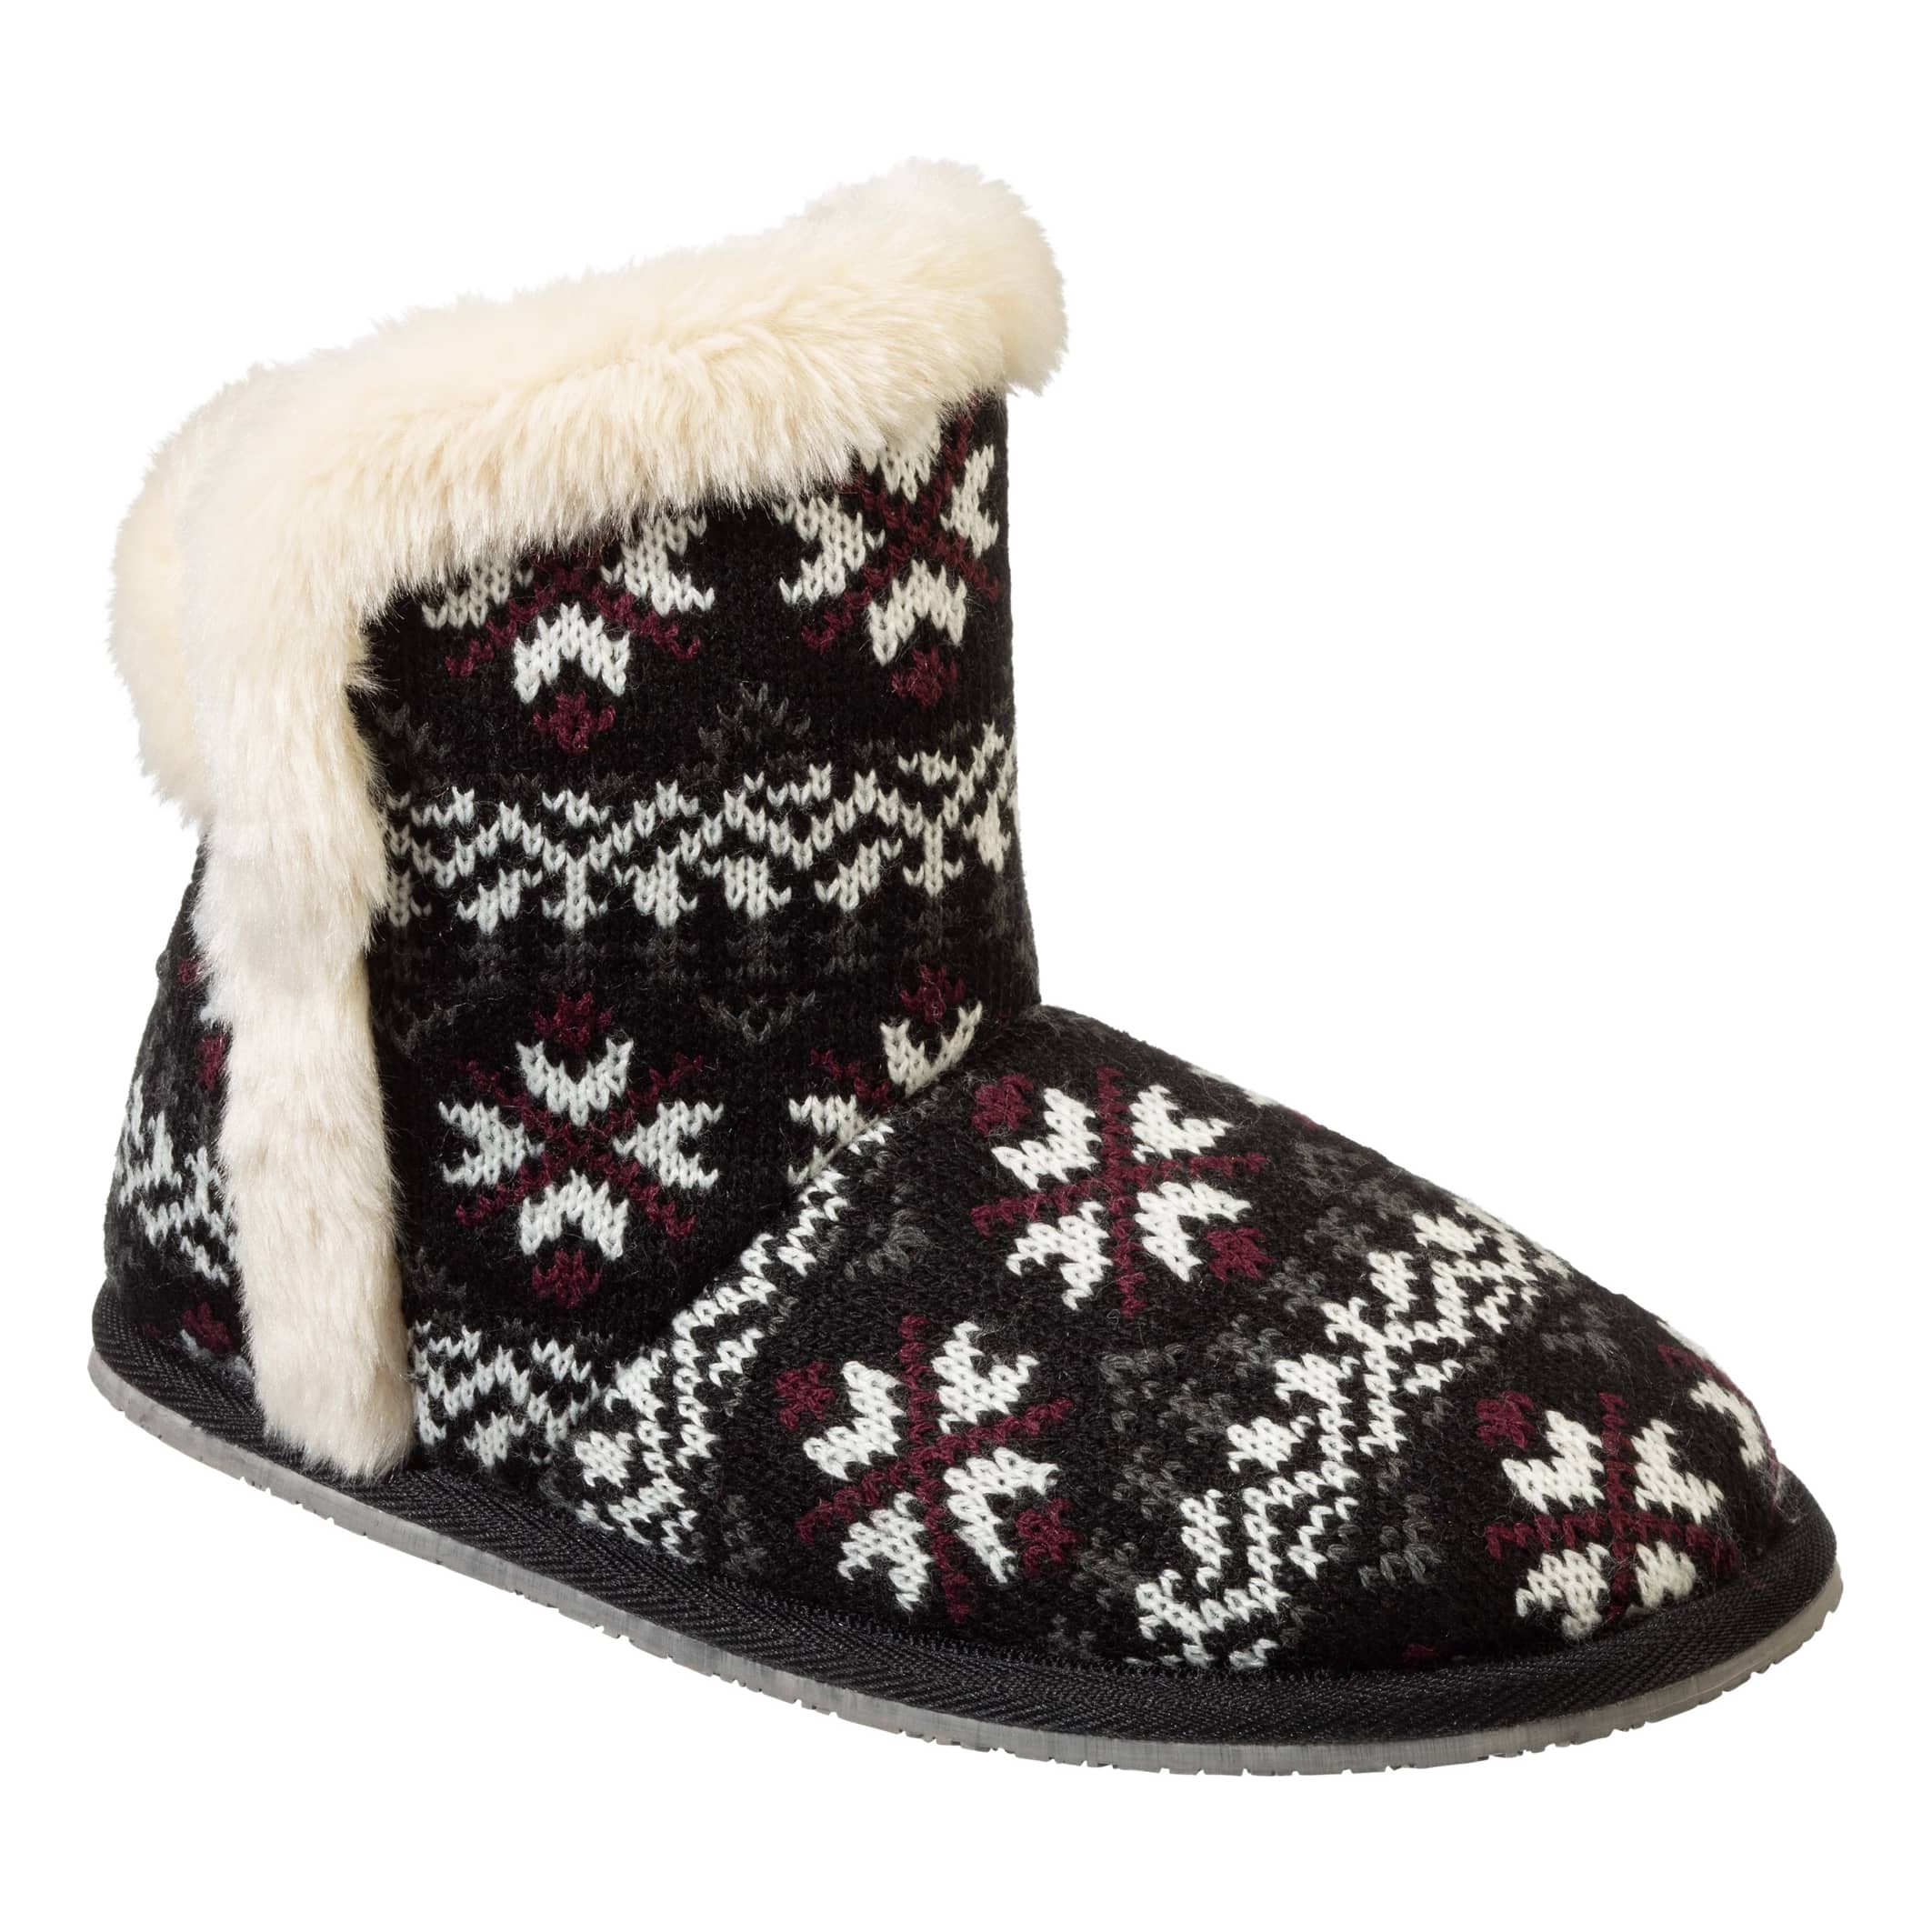 Natural Reflections® Women’s Fair Isle Knit Bootie Slippers